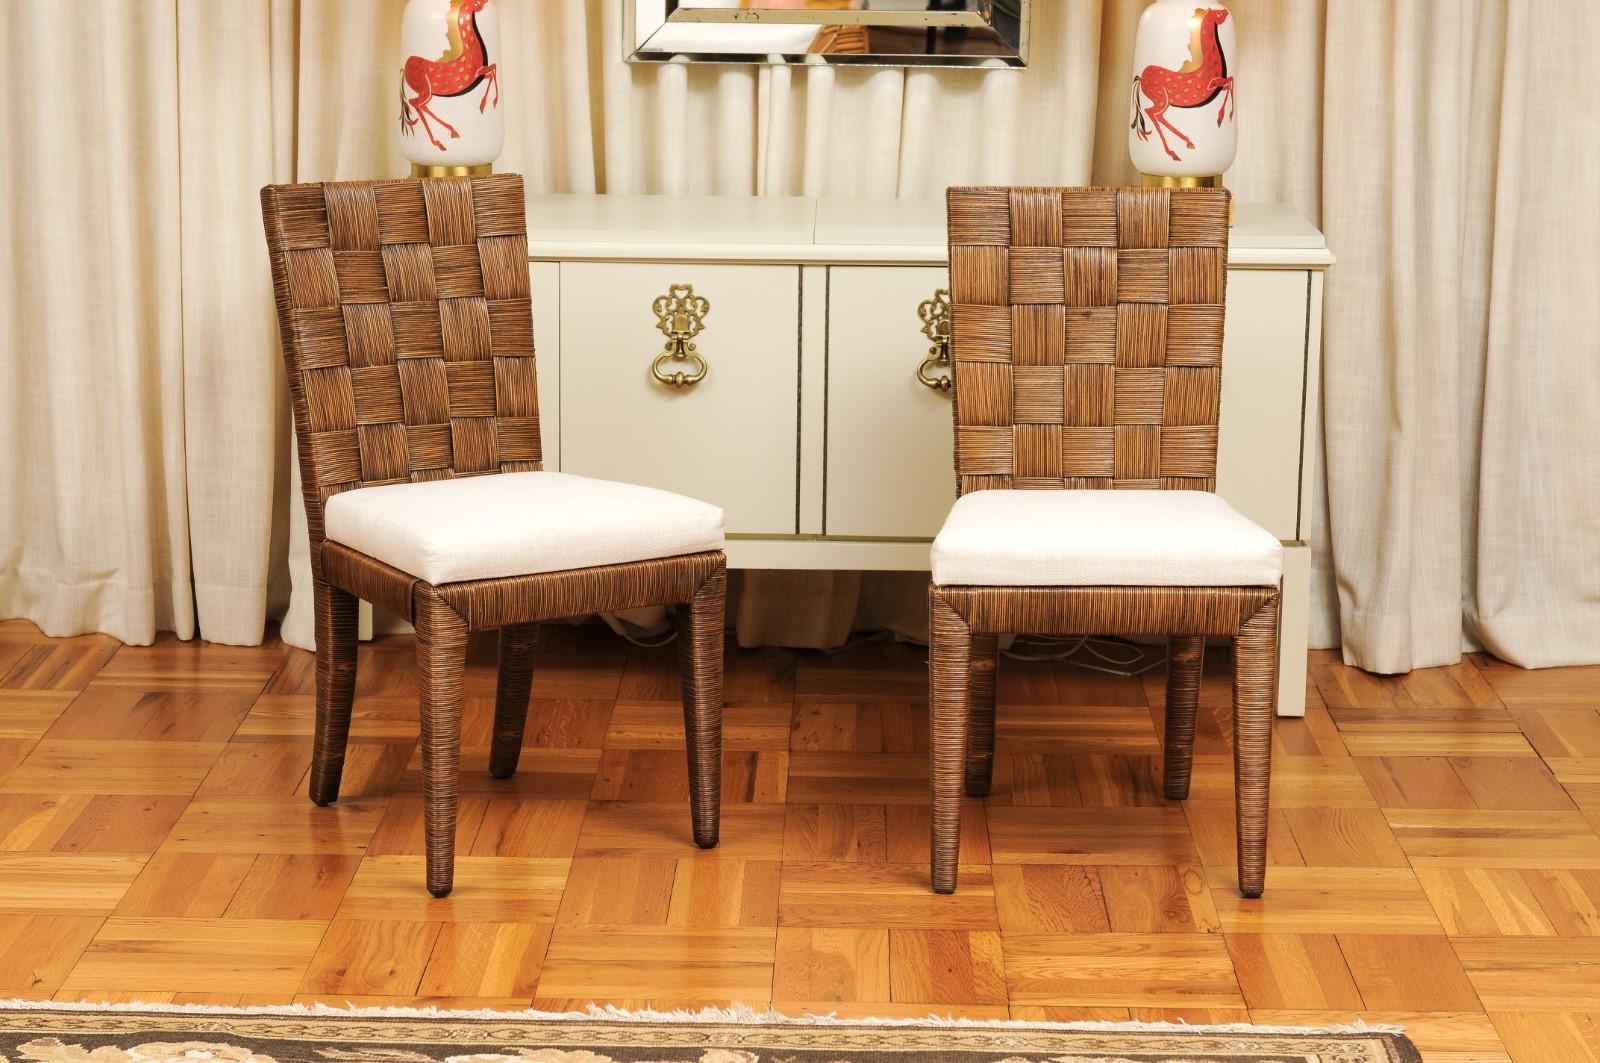 This magnificent large set of organic dining chairs is shipped as professionally photographed and described in the listing narrative: Meticulously professionally restored, newly custom upholstered and installation ready. Expert custom upholstery